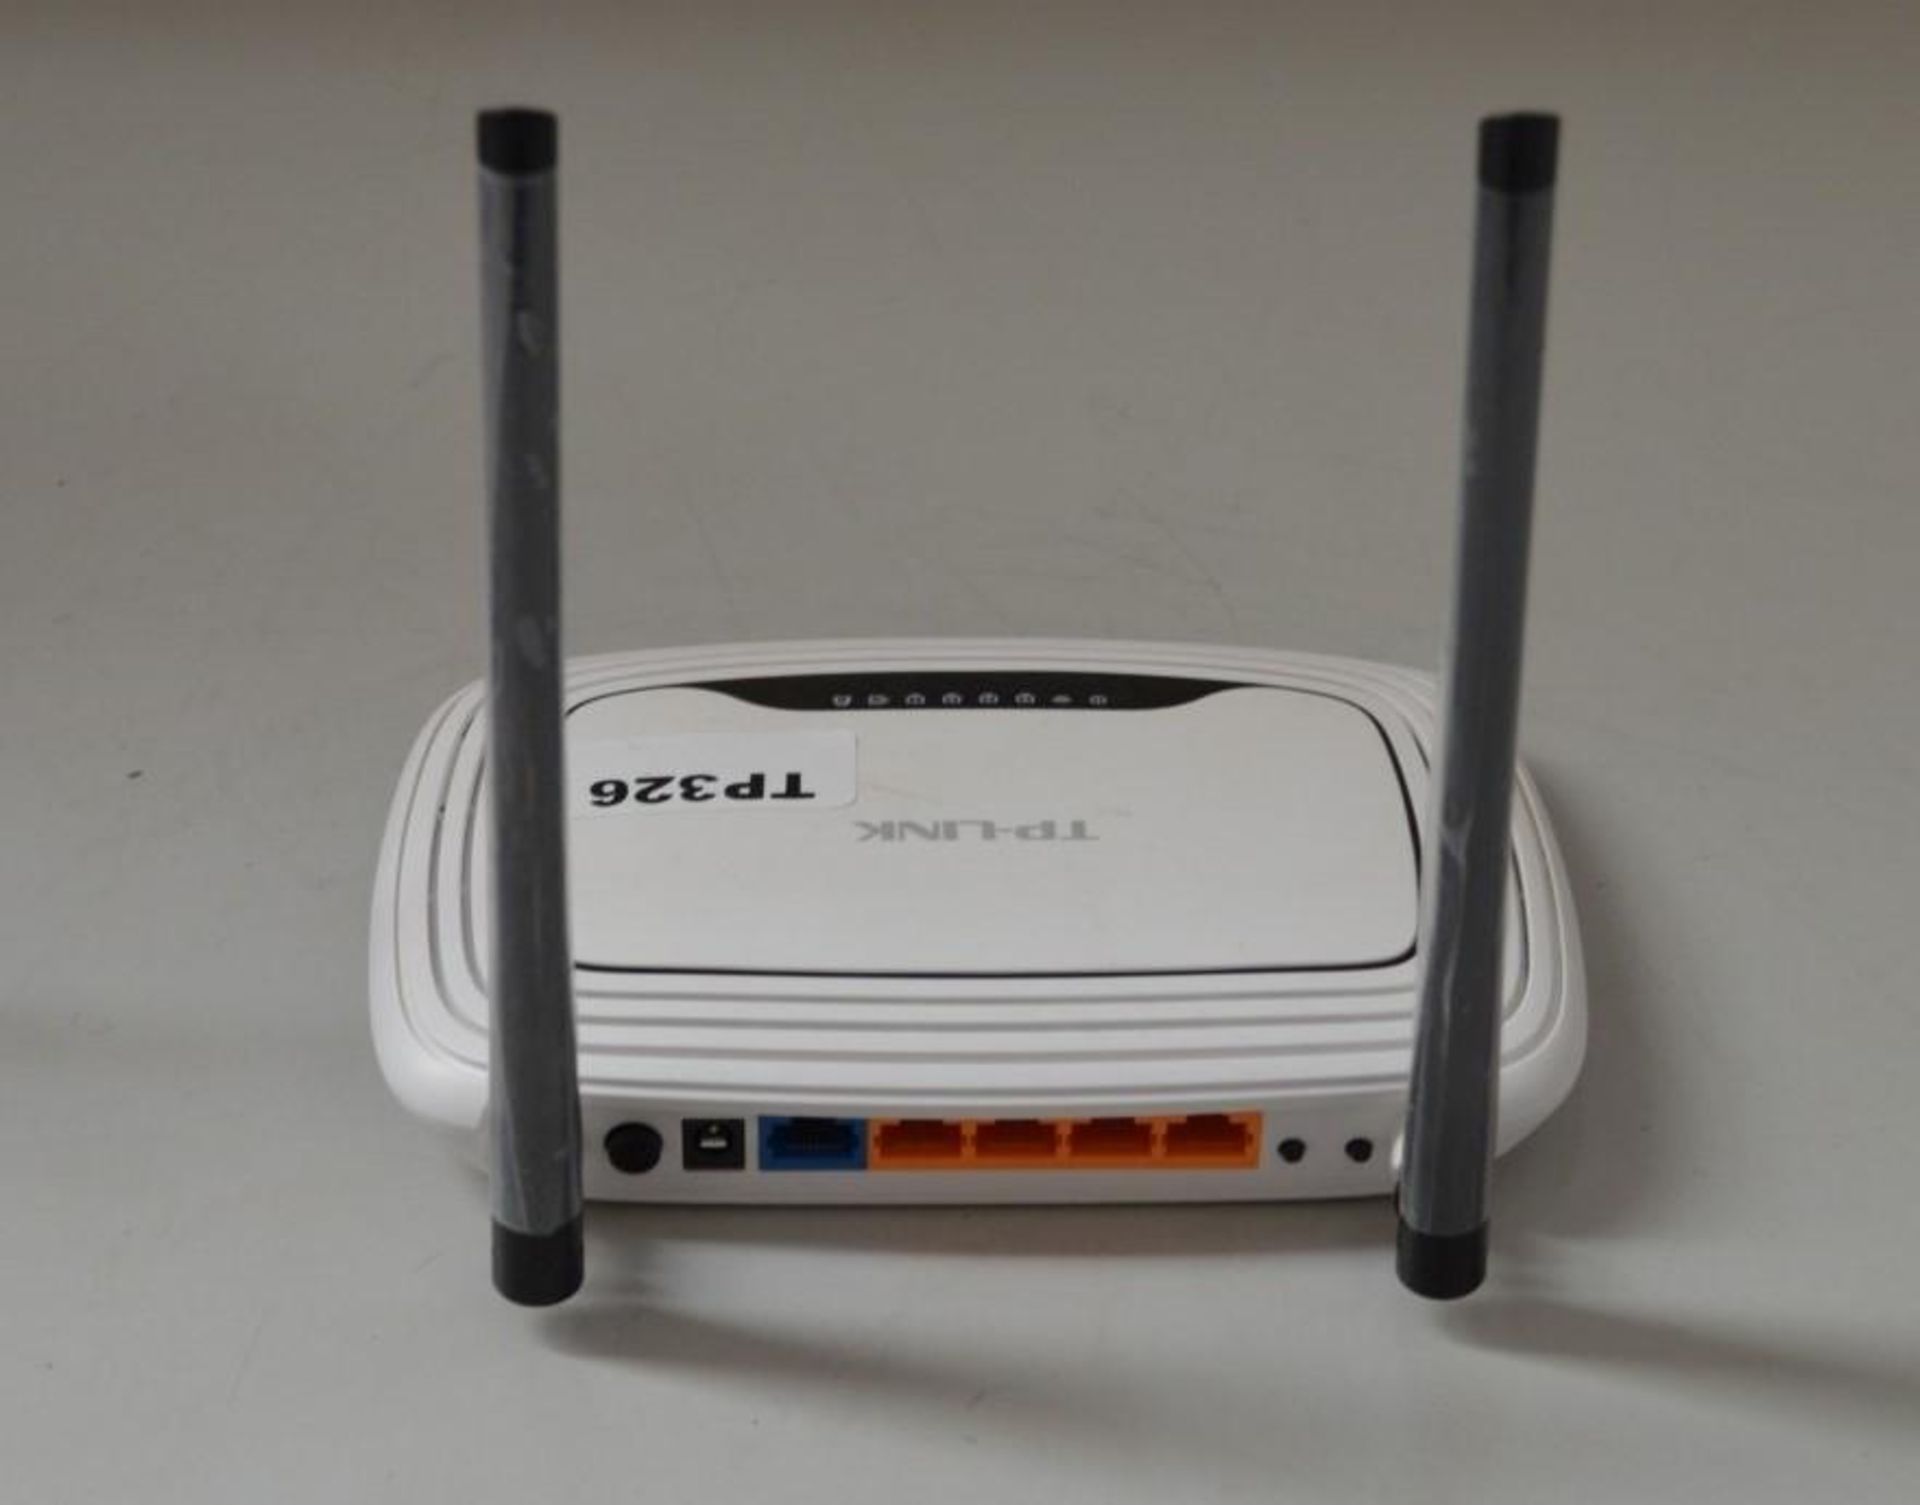 2 x TP-Link TL-WR841N 300 Mbps Wireless Routers - Ref TP326 - CL394 - Location: Altrincham WA14 - HK - Image 3 of 3